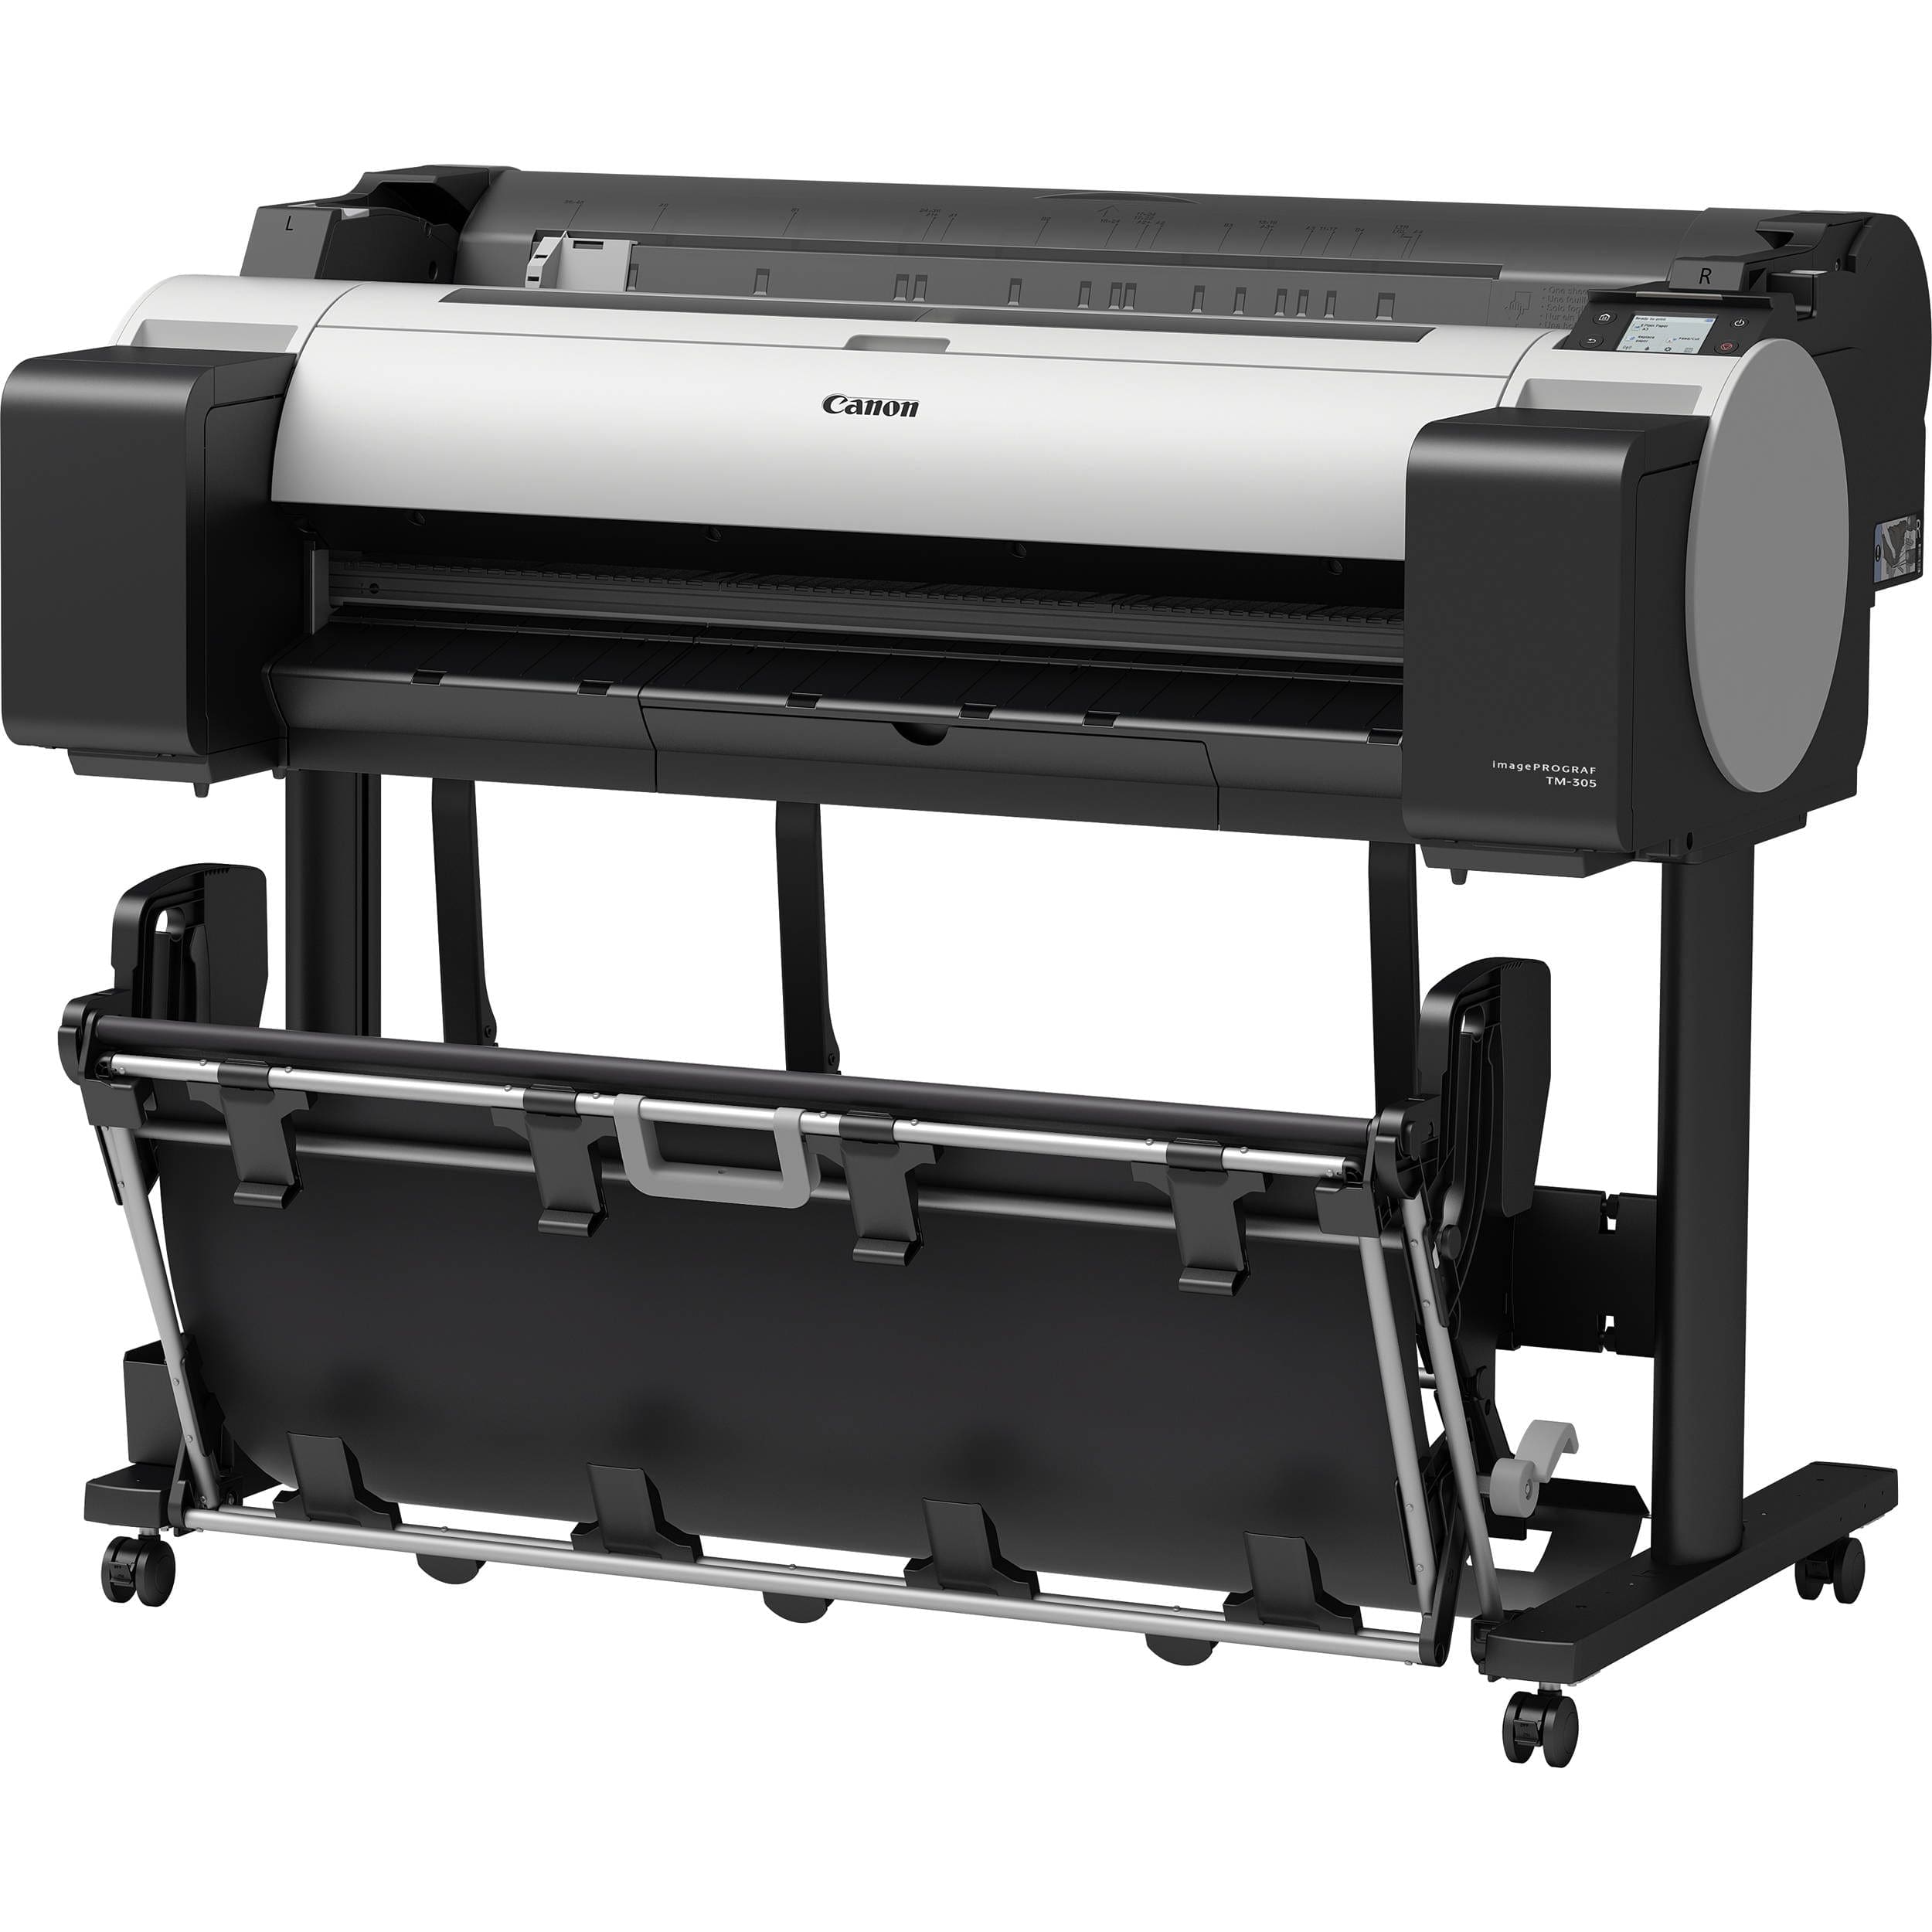 Civic Akademi Pioner How Much Do Wide Format Printers Cost in 2023?